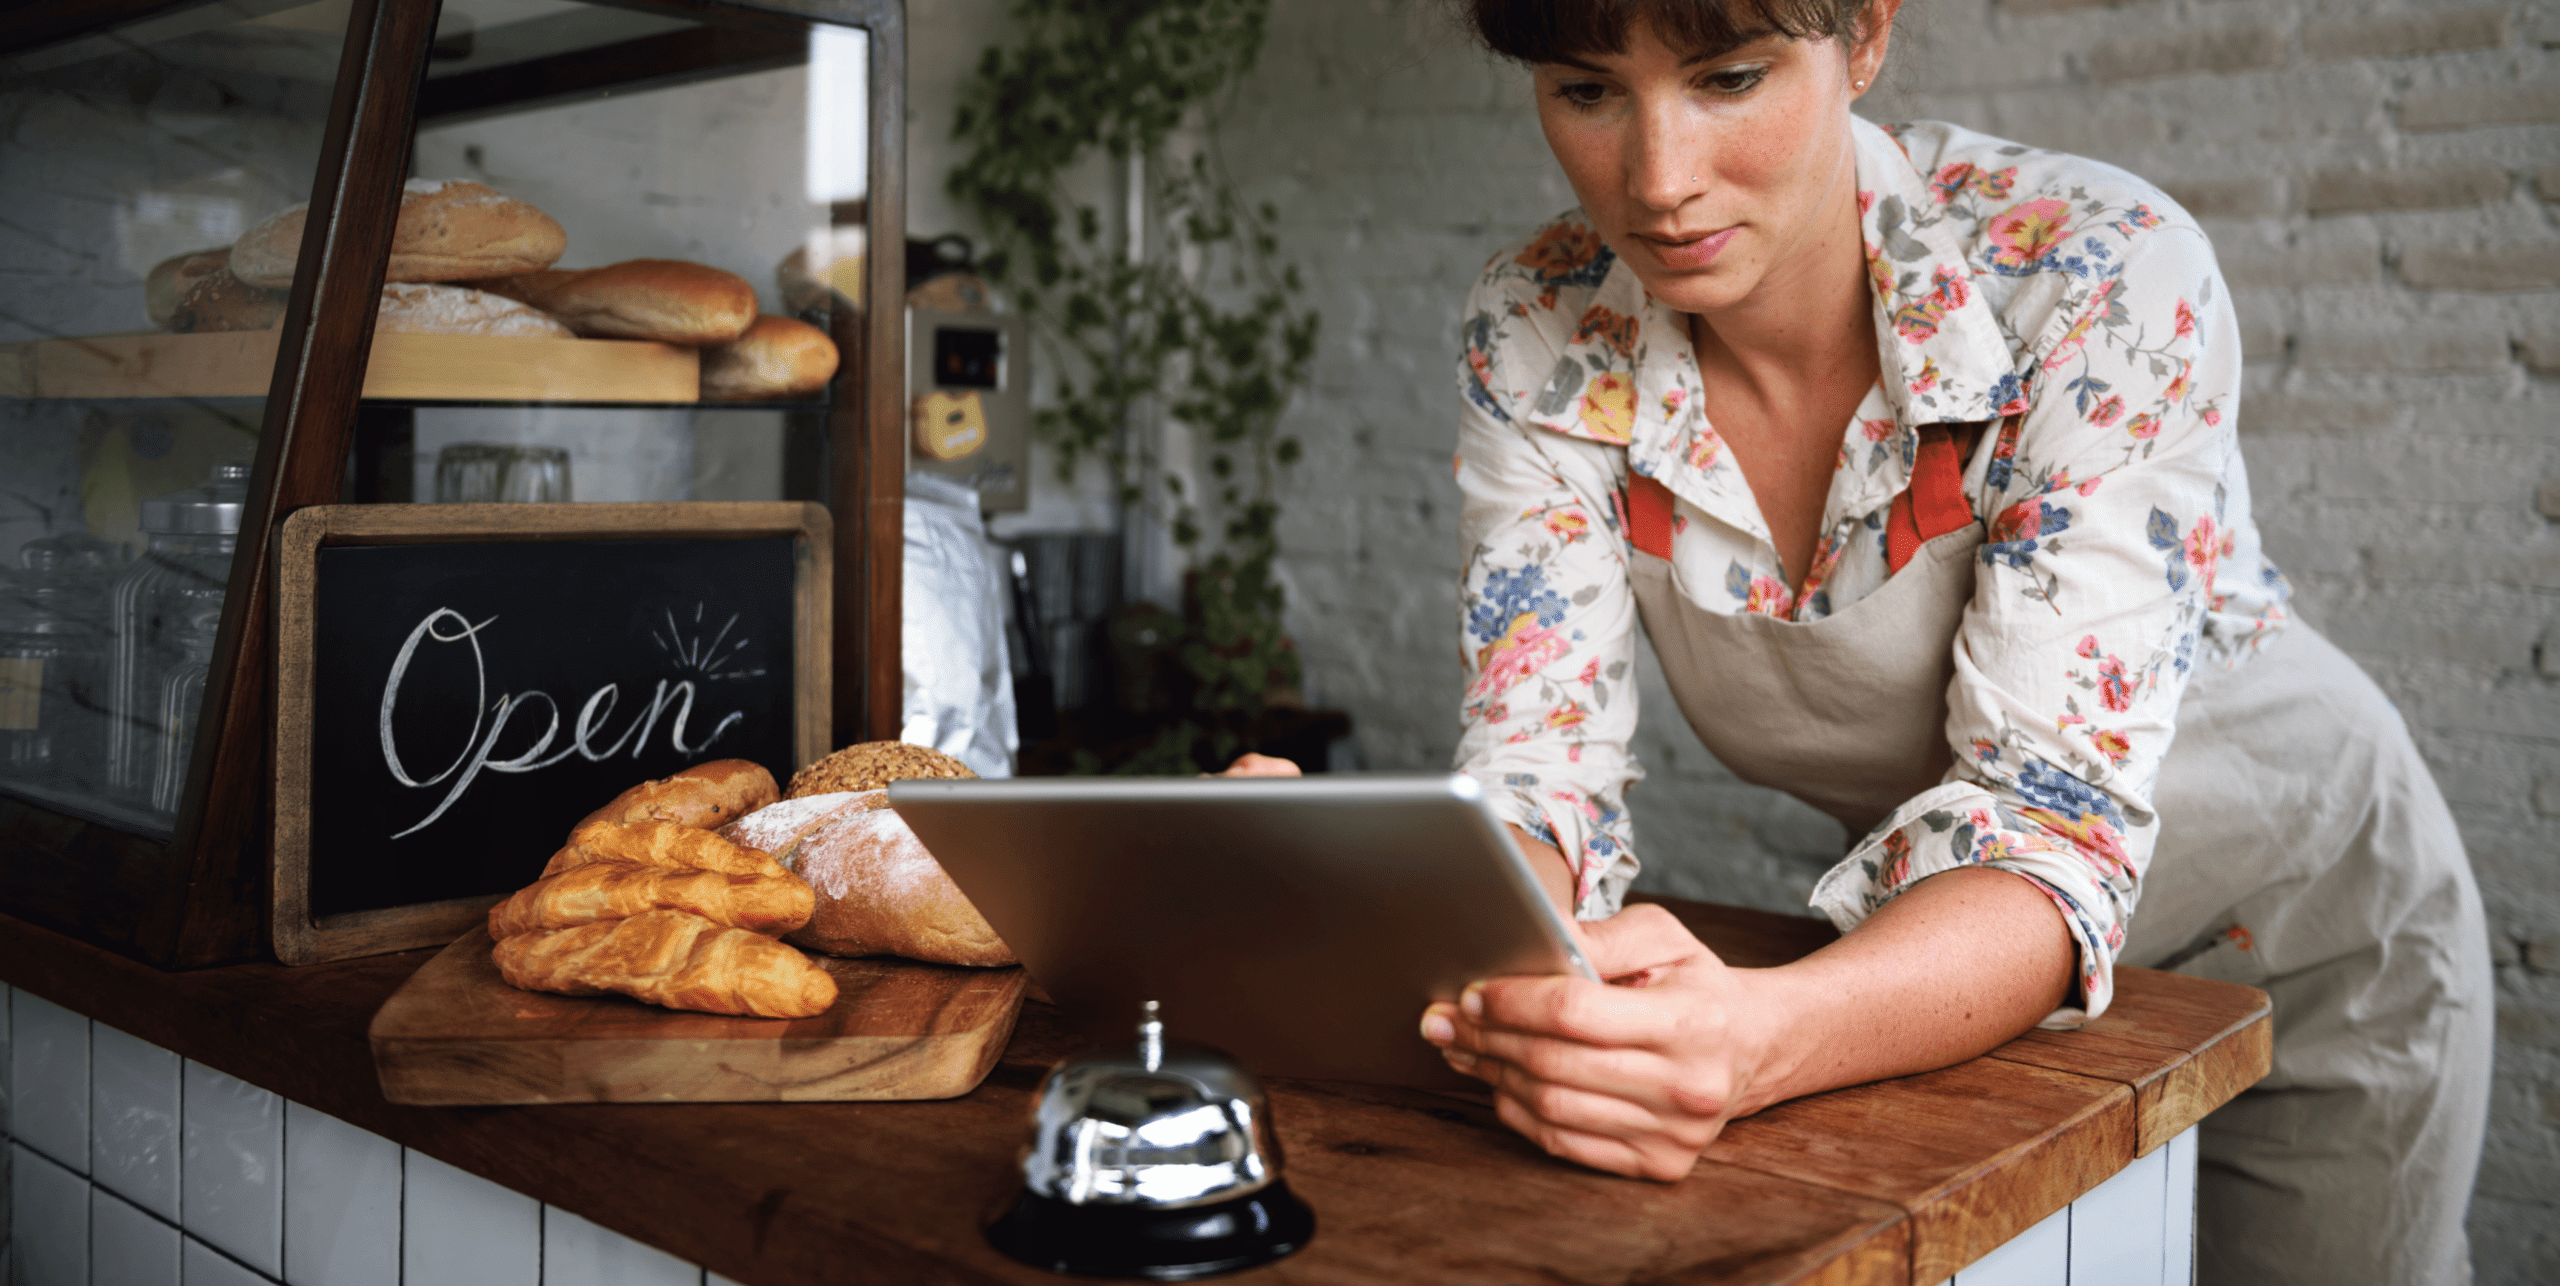 A woman standing at a bakery counter looking at an ipad